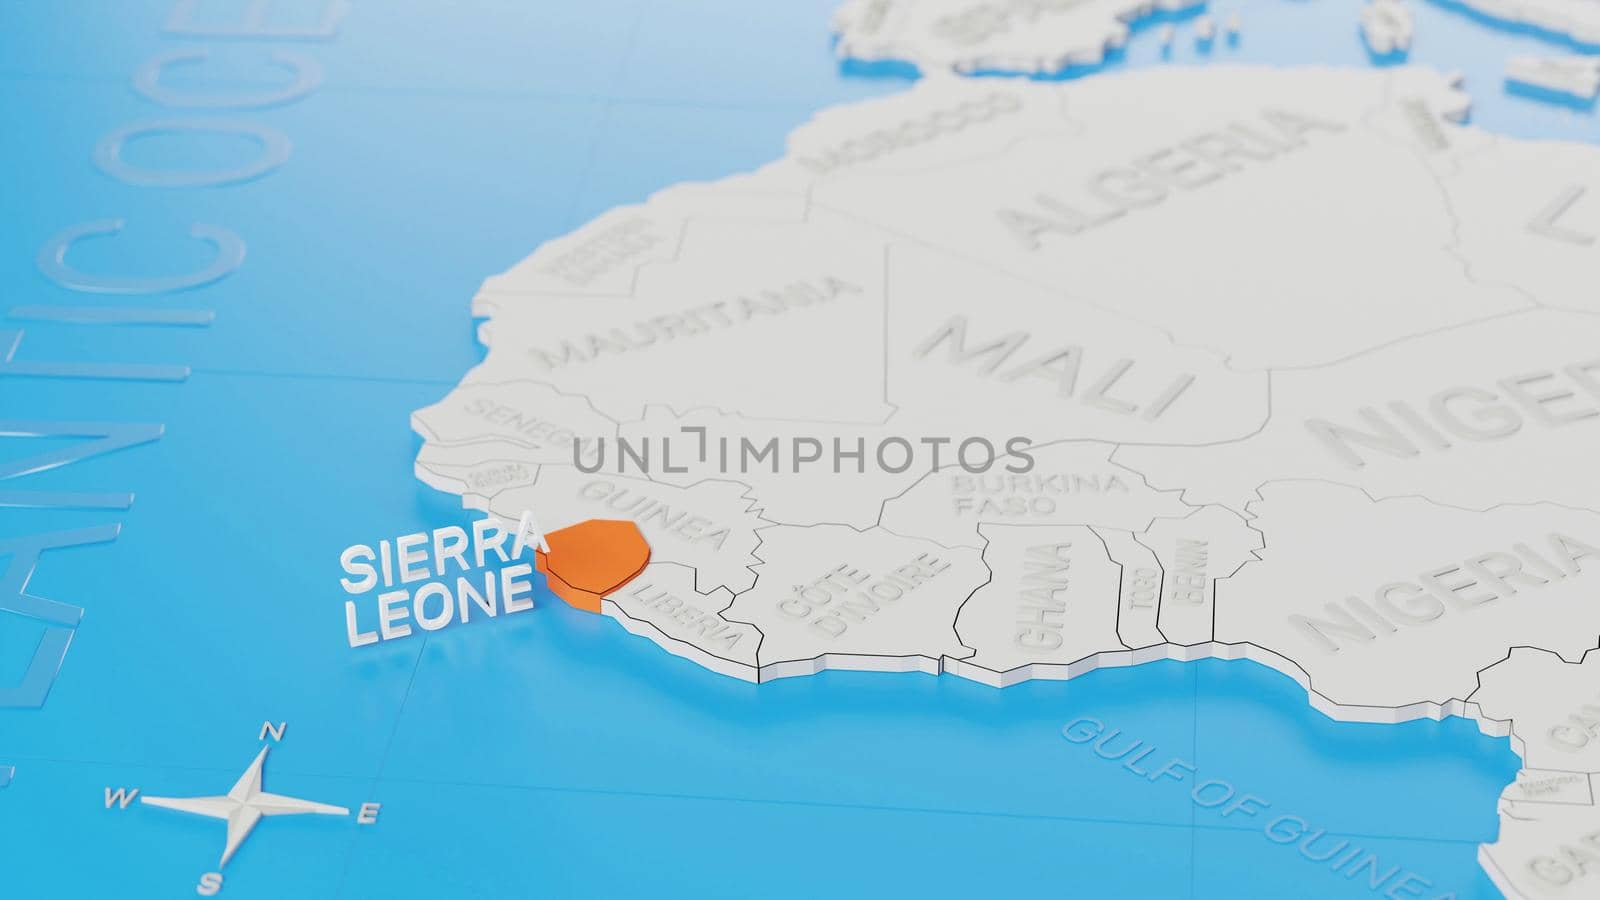 Sierra Leone highlighted on a white simplified 3D world map. Digital 3D render.